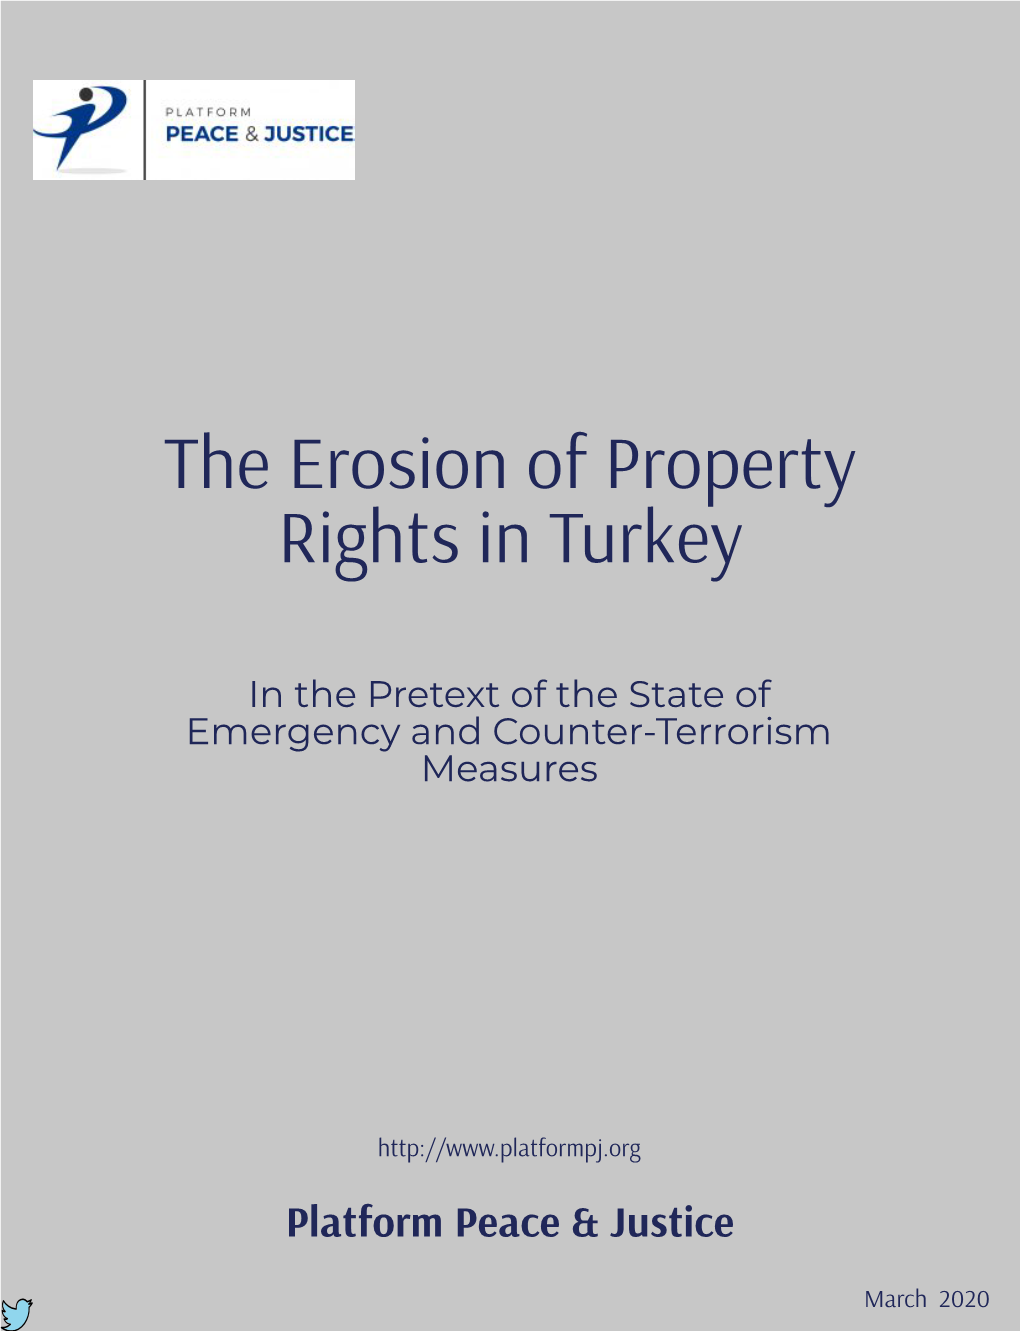 The Erosion of Property Rights in Turkey